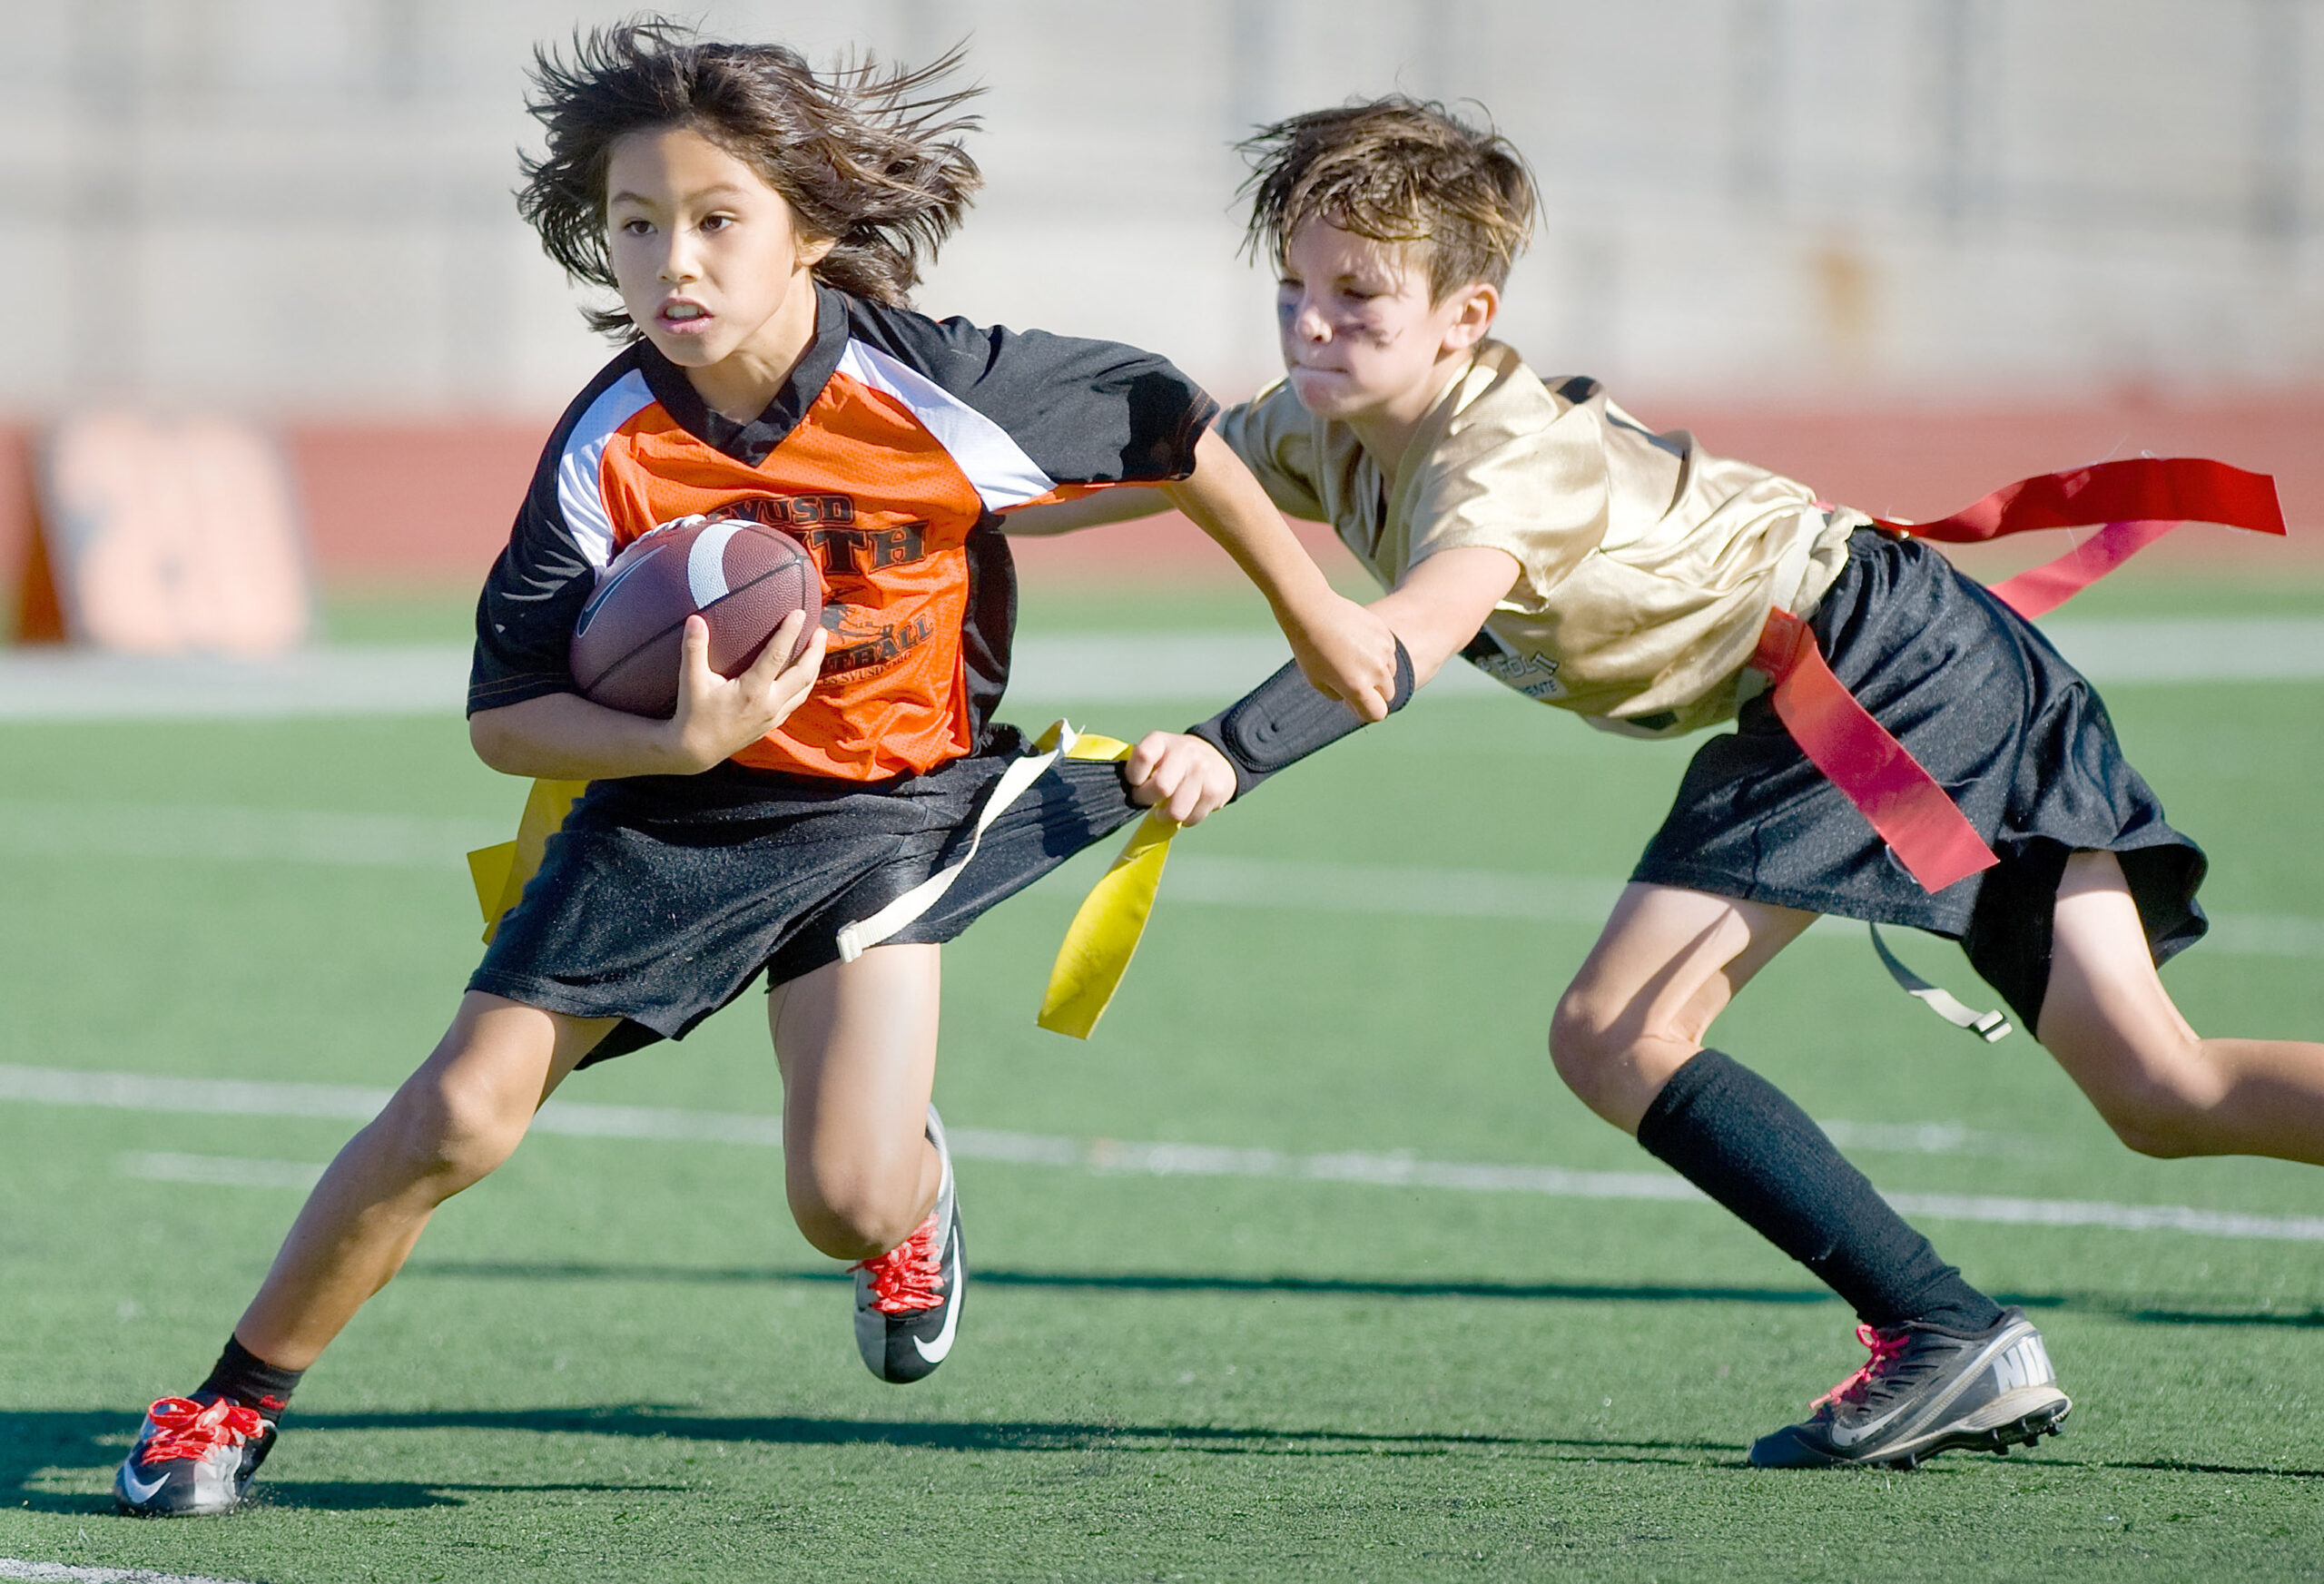 Is Flag Football a Pipeline or a Standalone Sport?